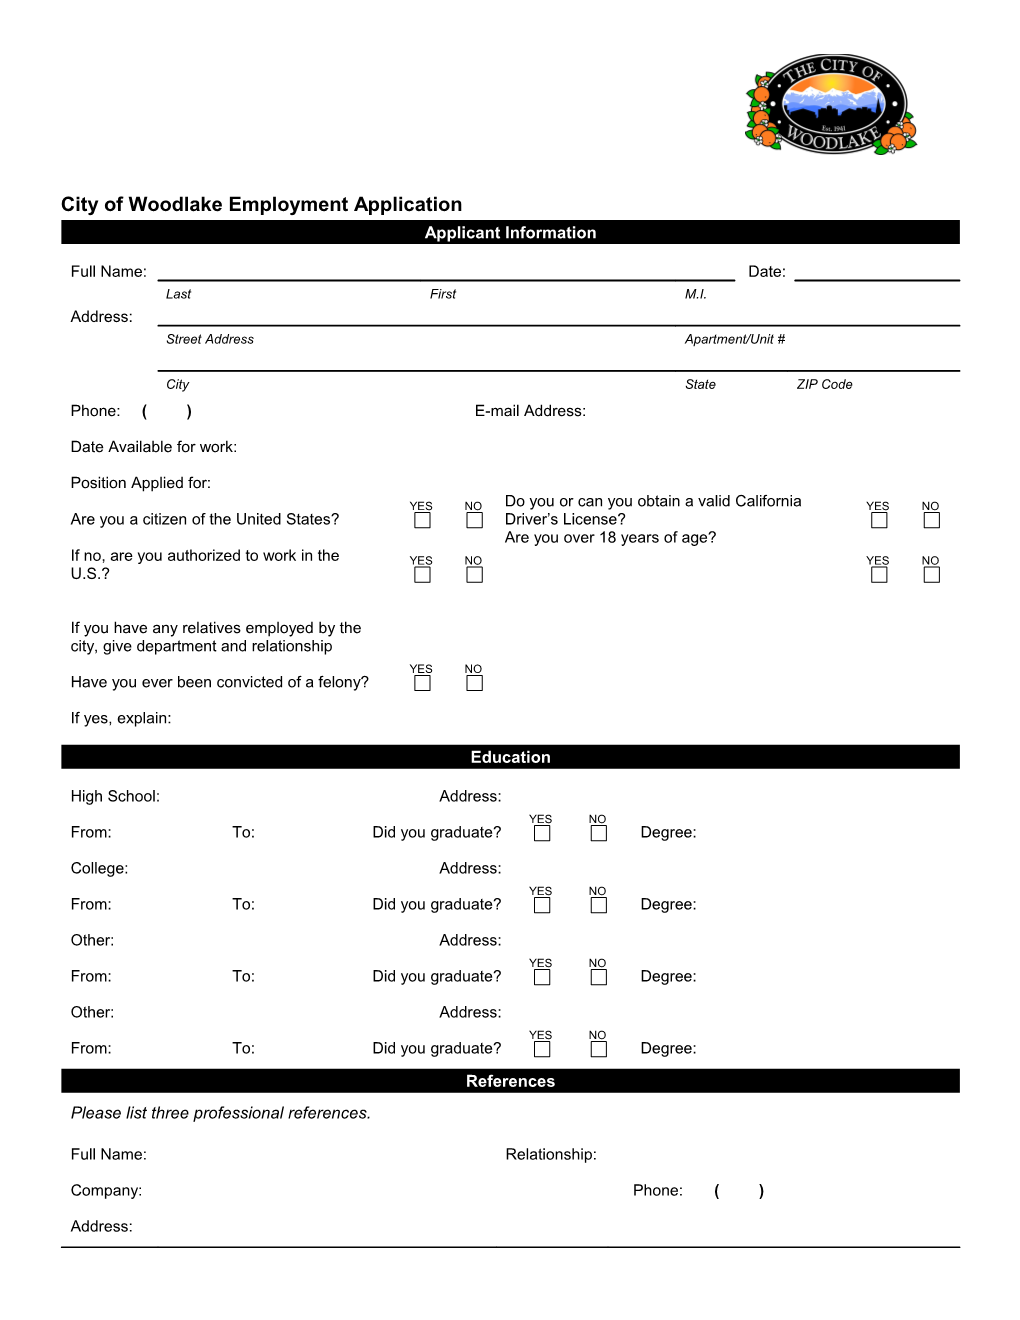 City of Woodlake Employment Application